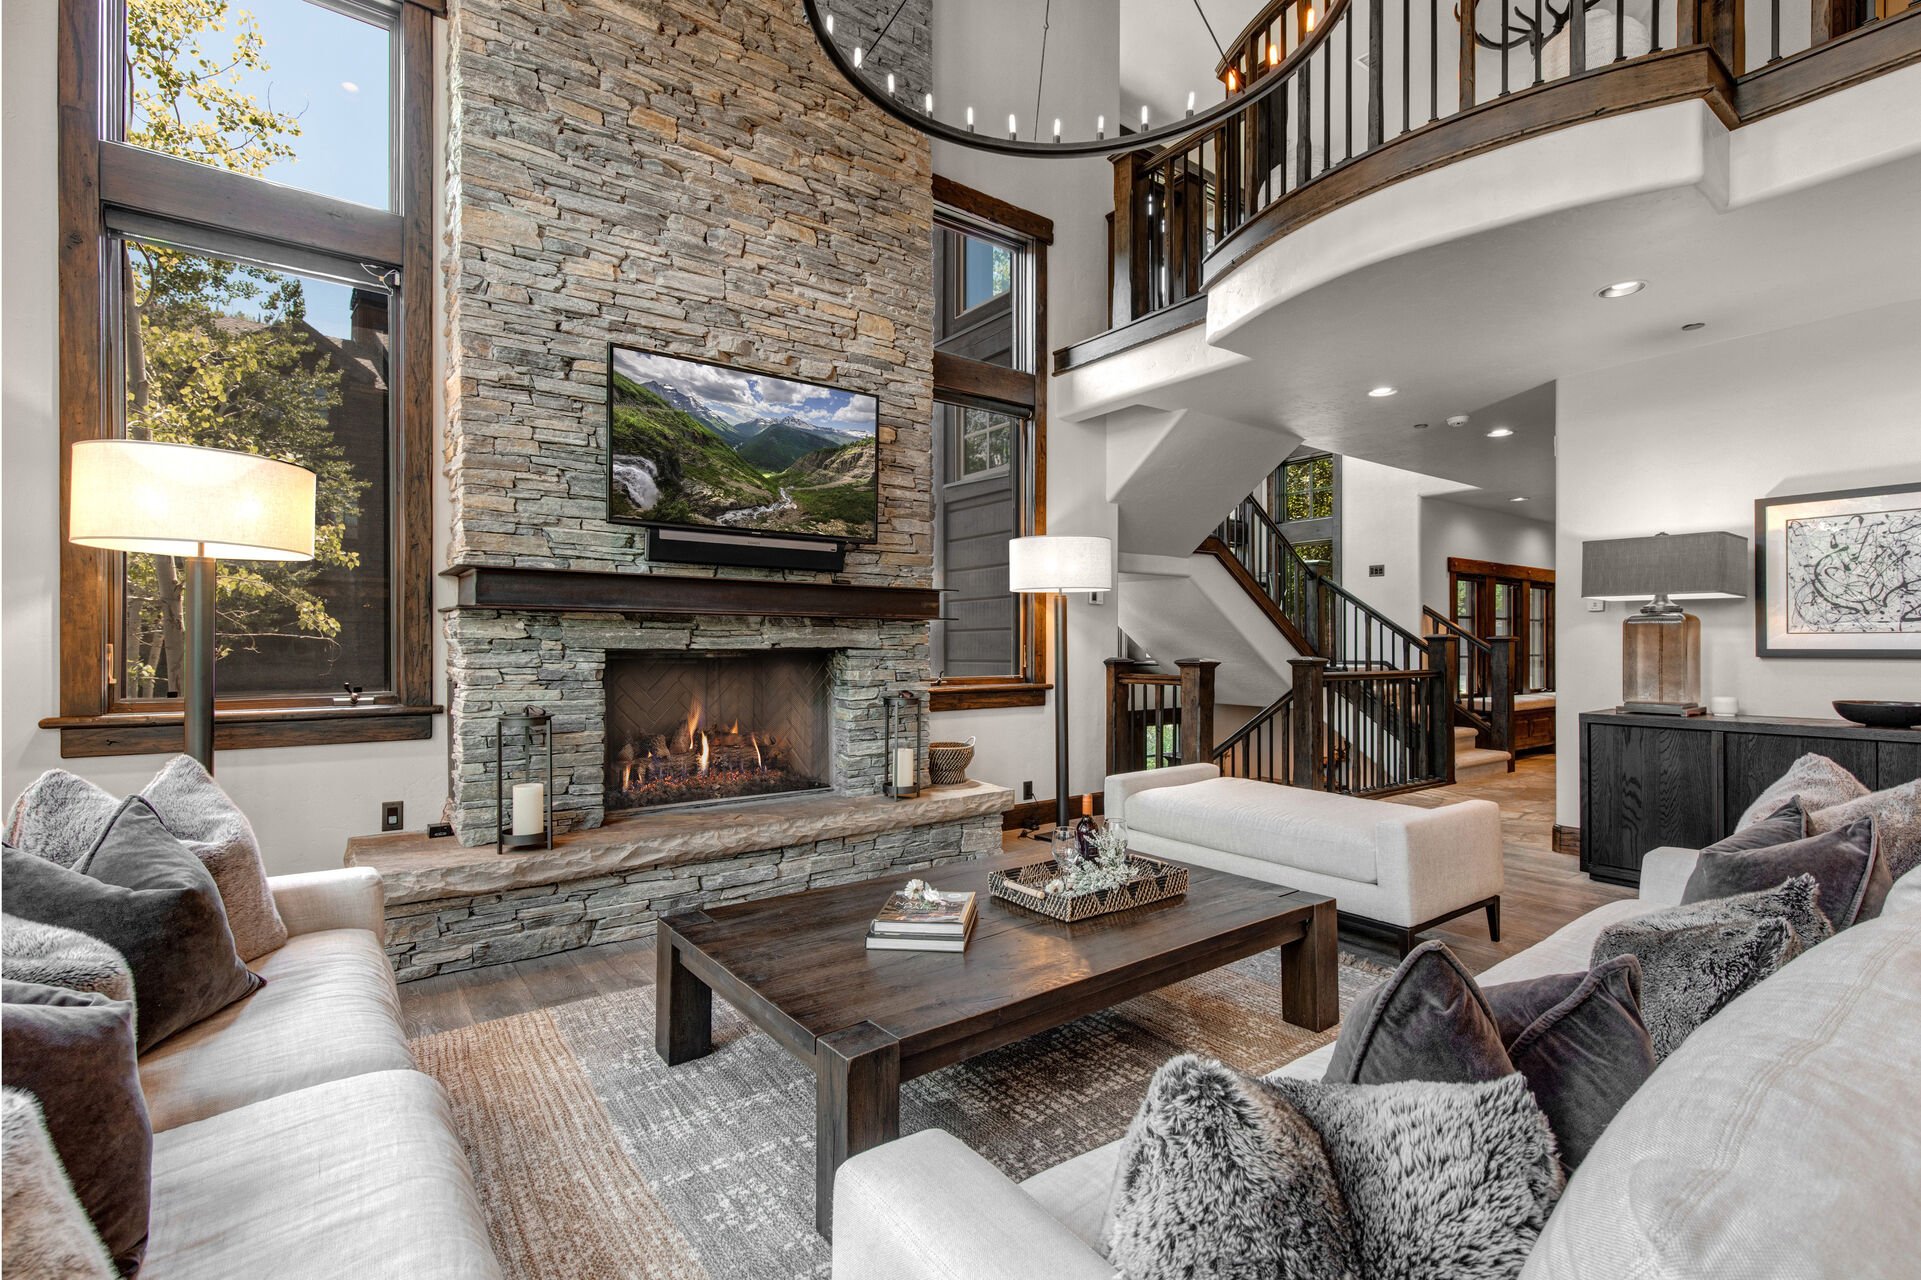 Explore our Park City luxury vacation homes